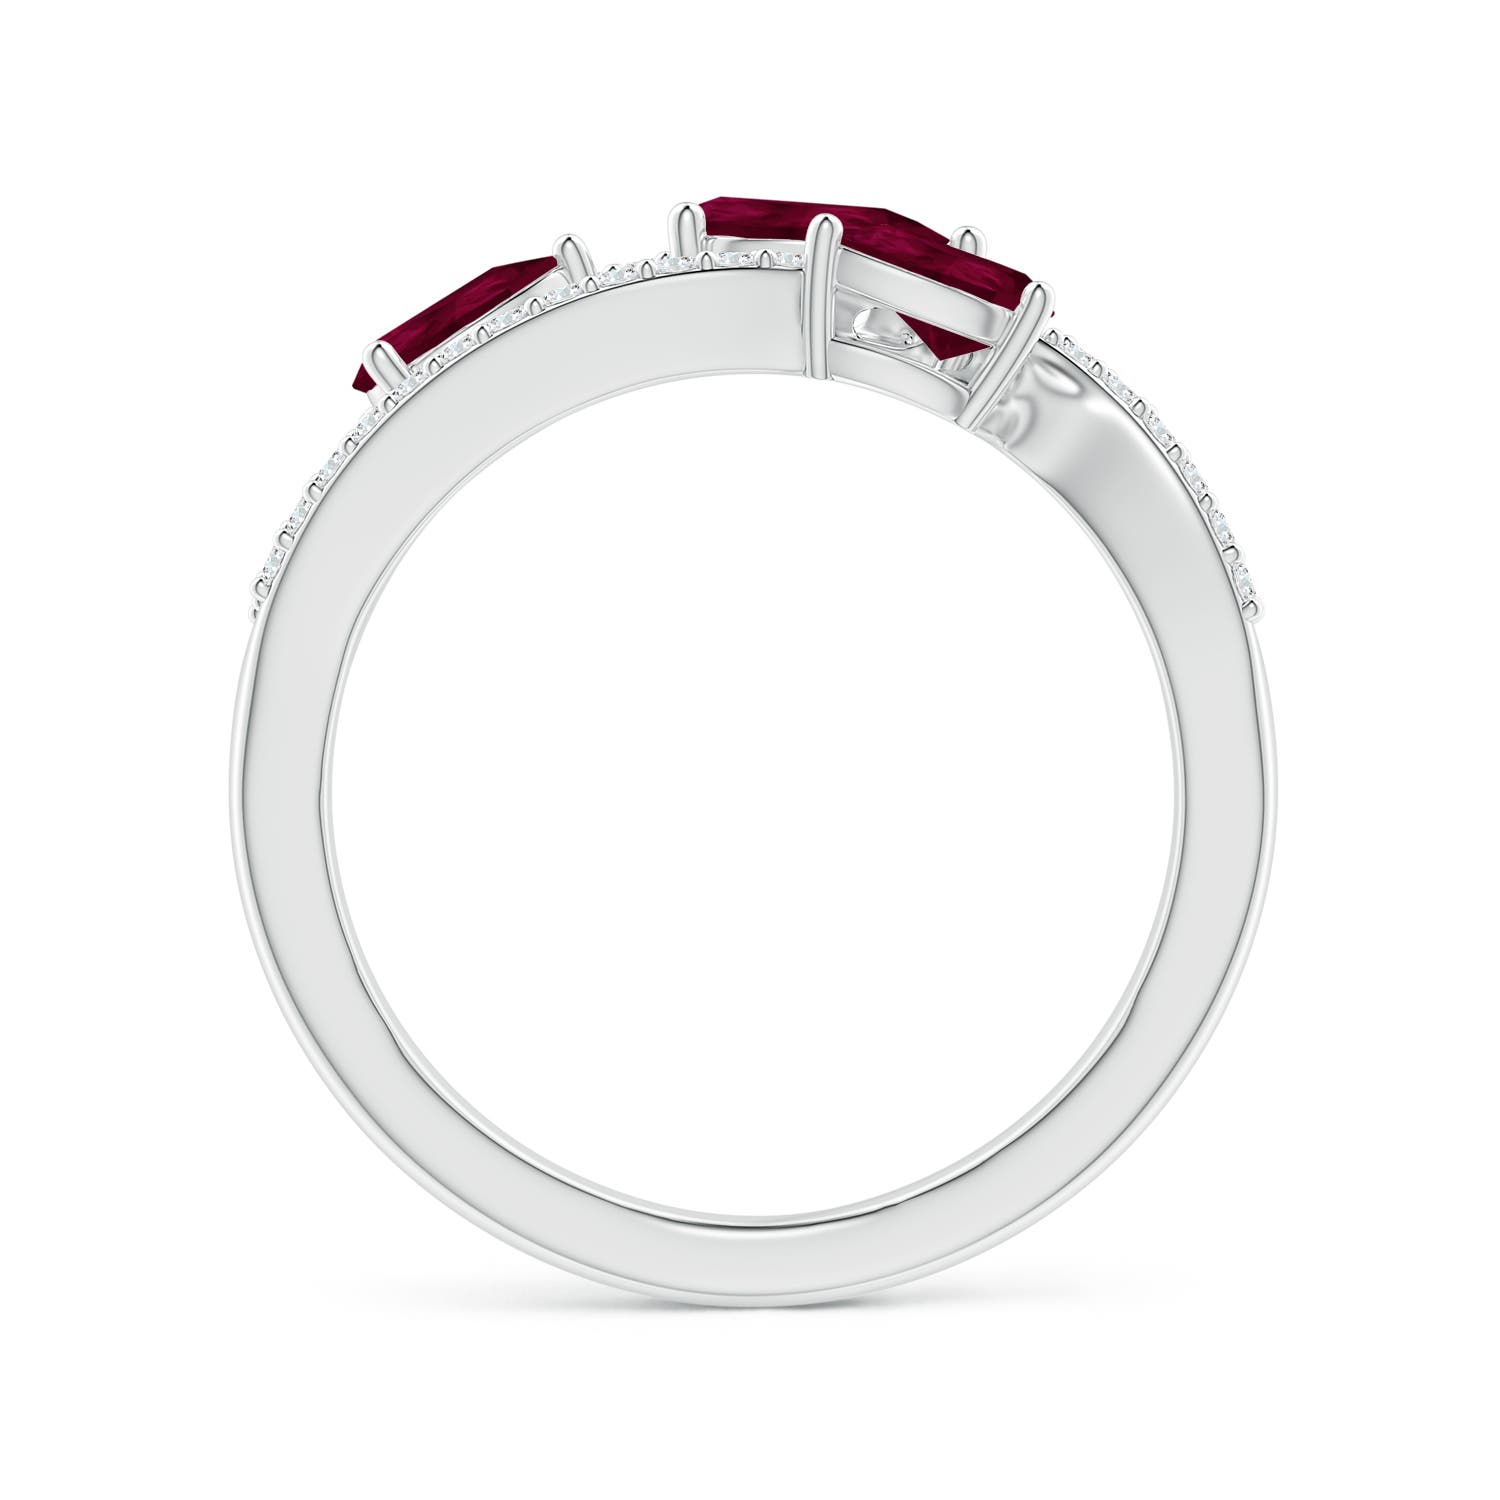 A - Ruby / 1.03 CT / 14 KT White Gold